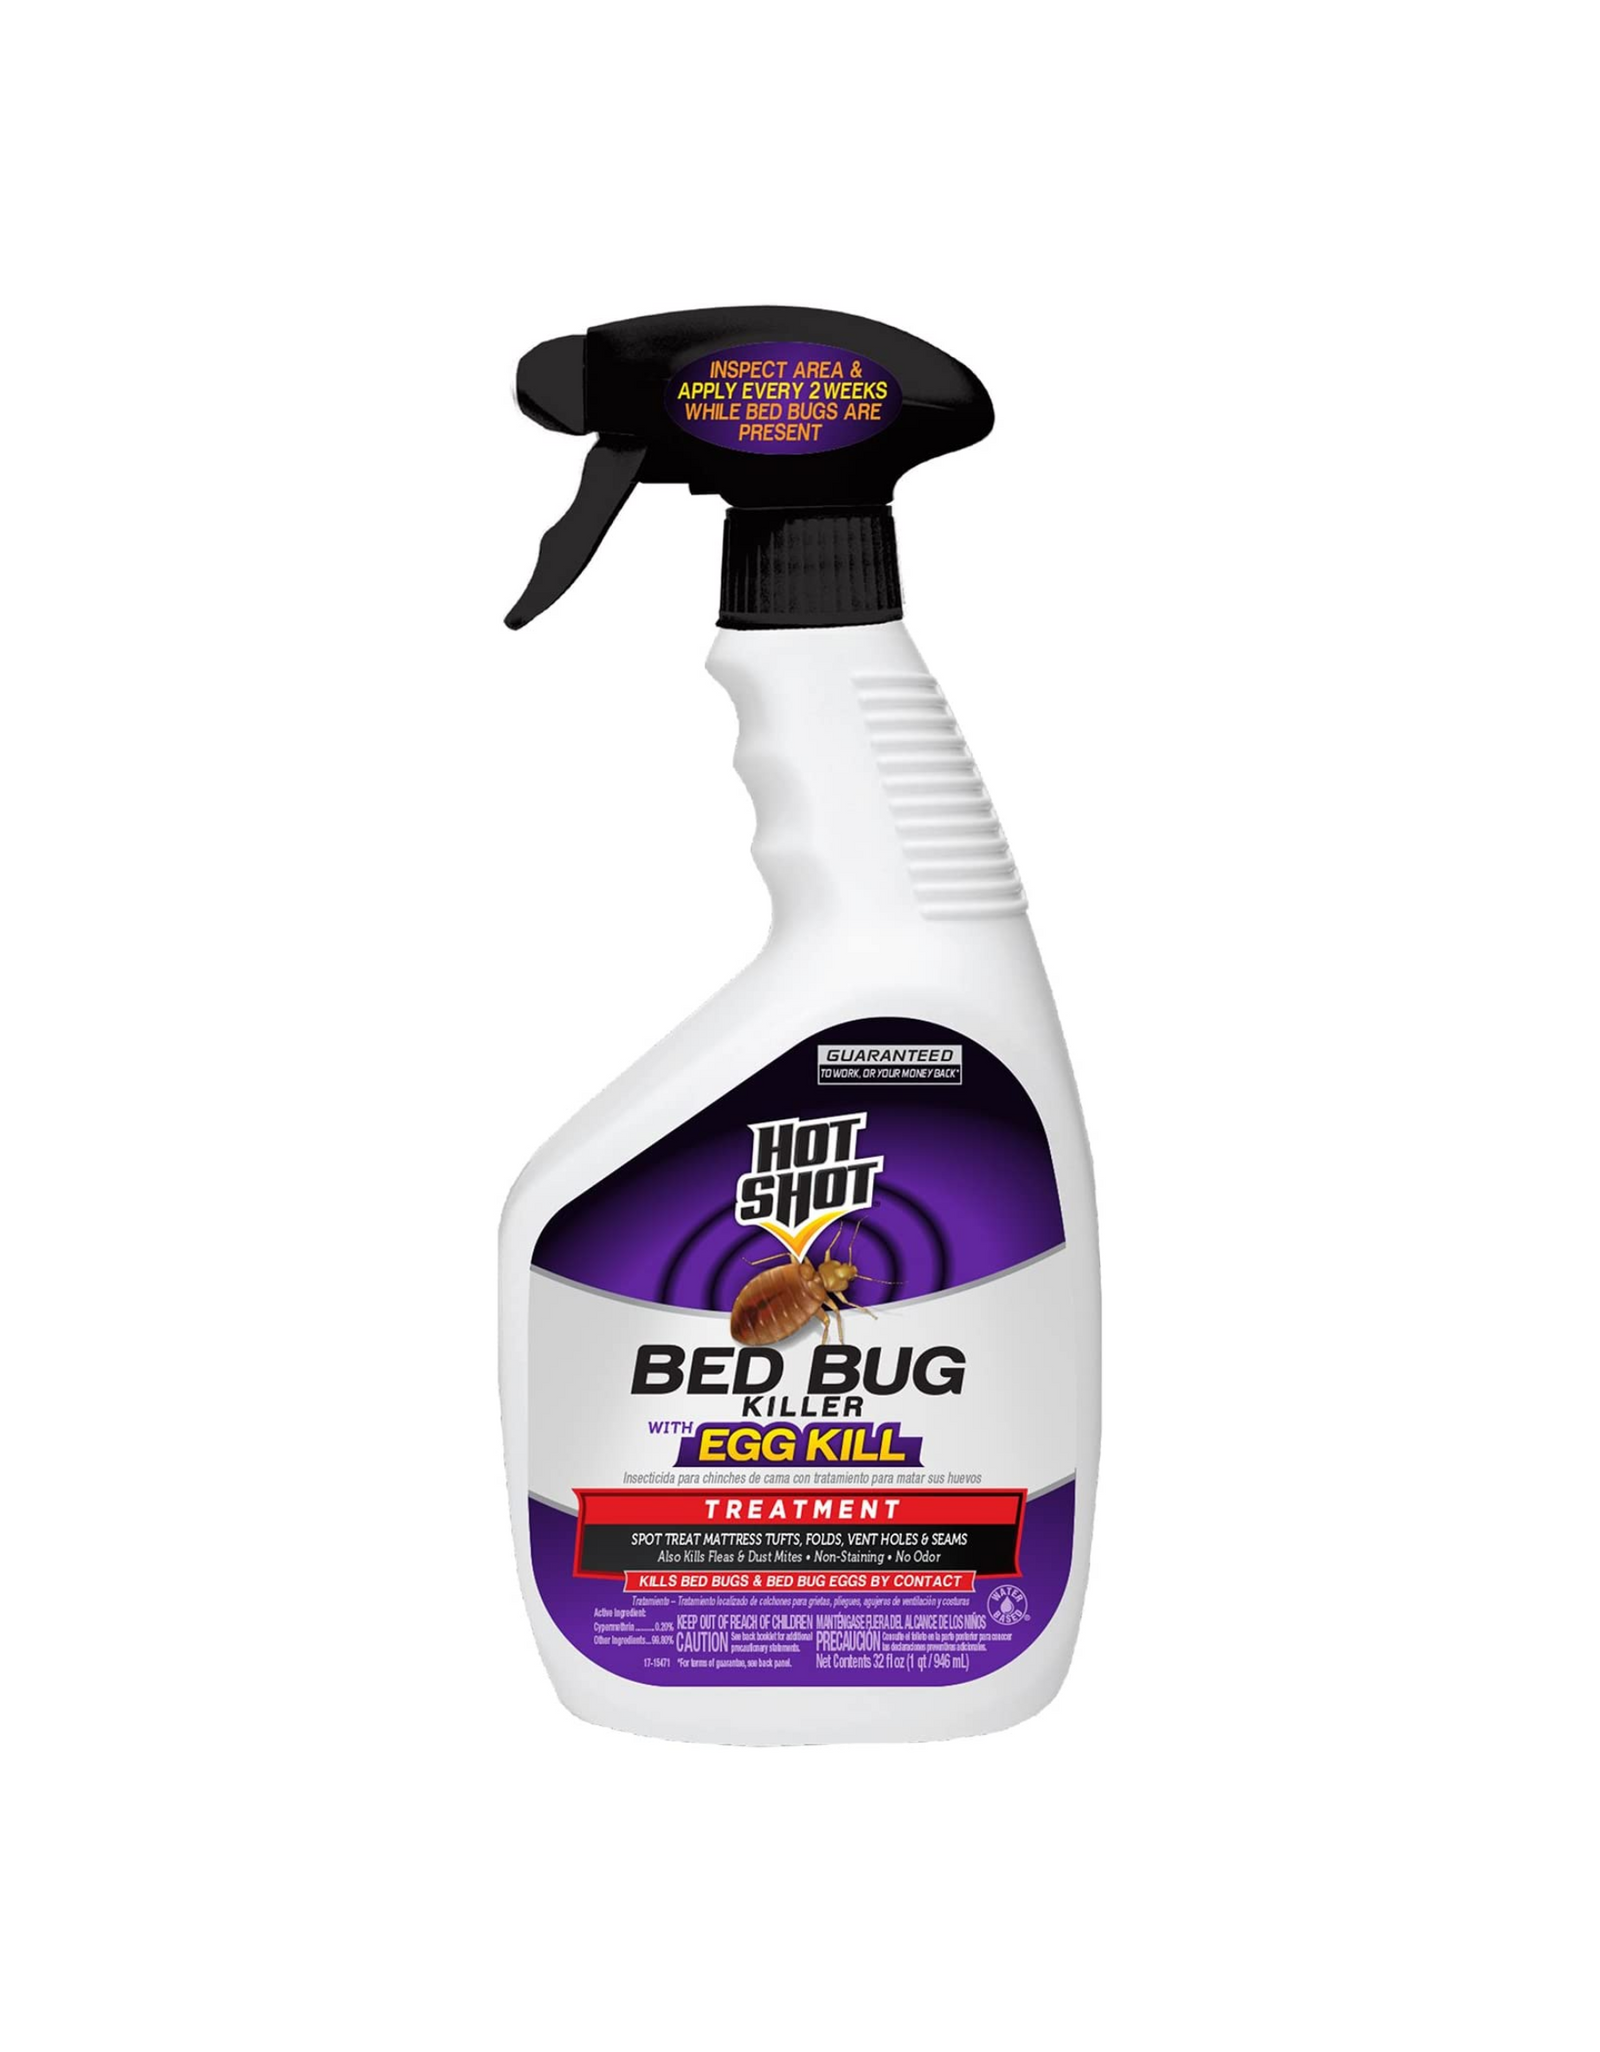 Hot Shot Ready-to-Use Bed Bug Killer Spray, Kills Bed Bugs and Eggs, 32 oz